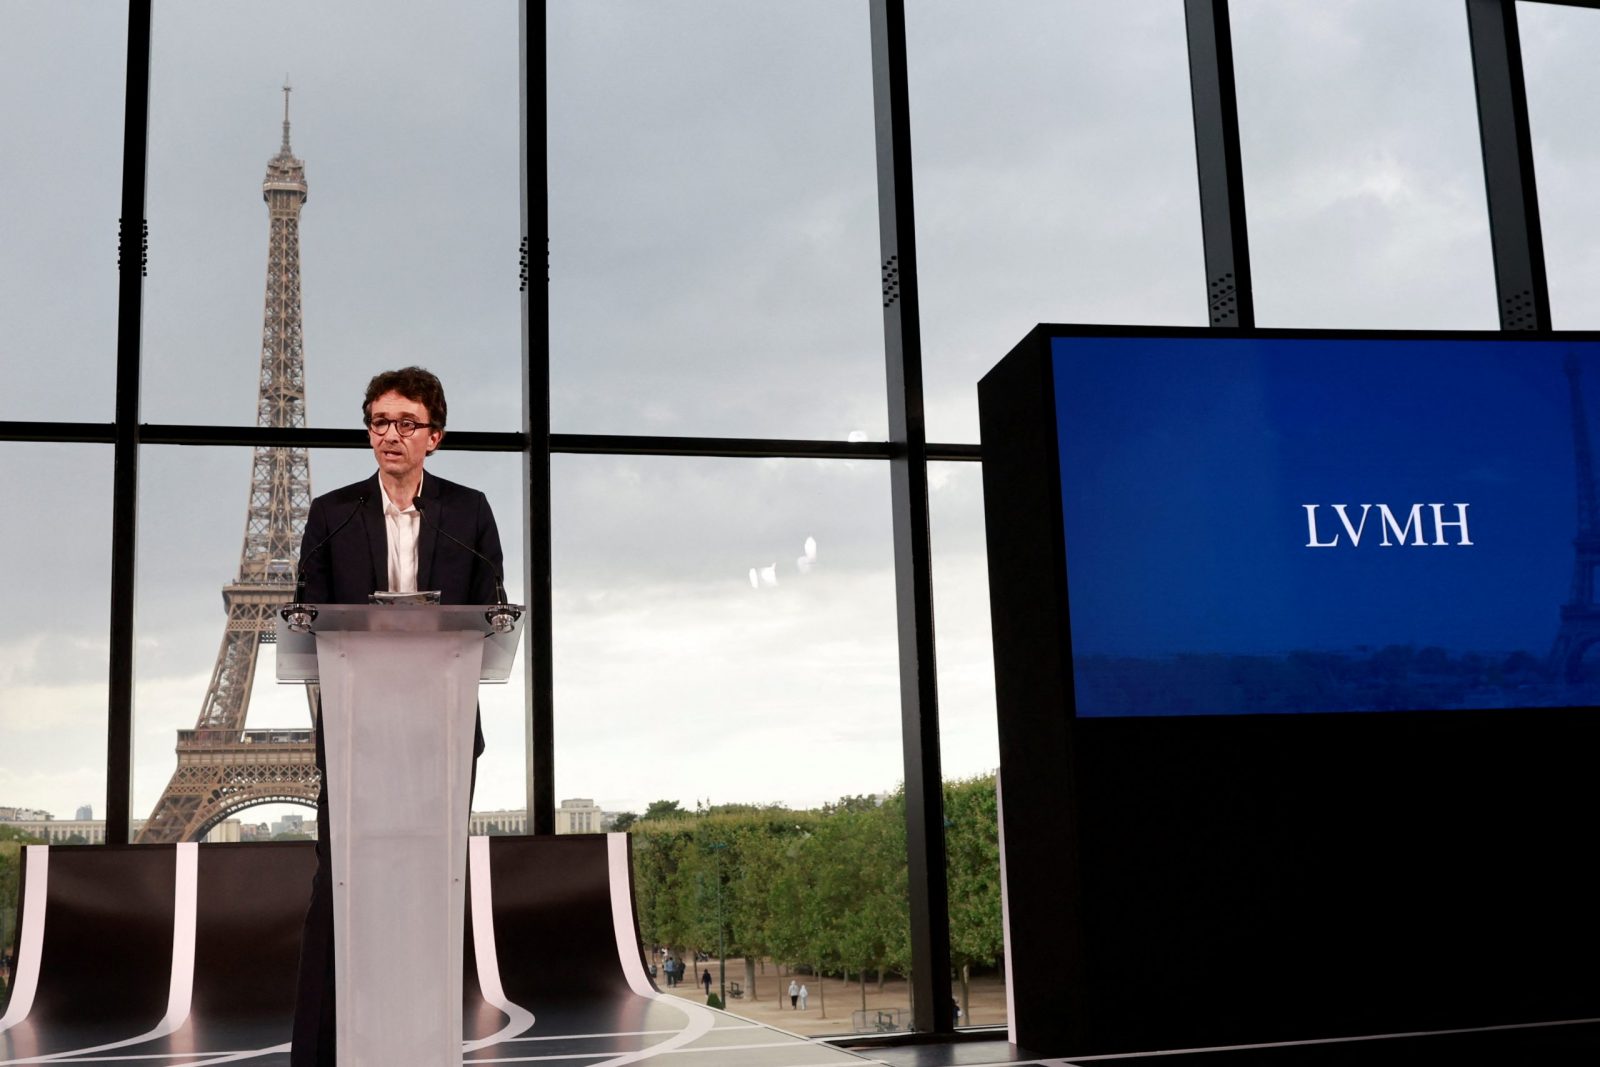 Antoine Arnault, Image Director of LVMH, speaks during a press conference to announce a LVMH sponsorship deal for the Paris 2024 Olympic Games at the Grand Palais Ephemere, with the Eiffel tower in the background, in Paris, France, July 24, 2023. REUTERS/Pascal Rossignol